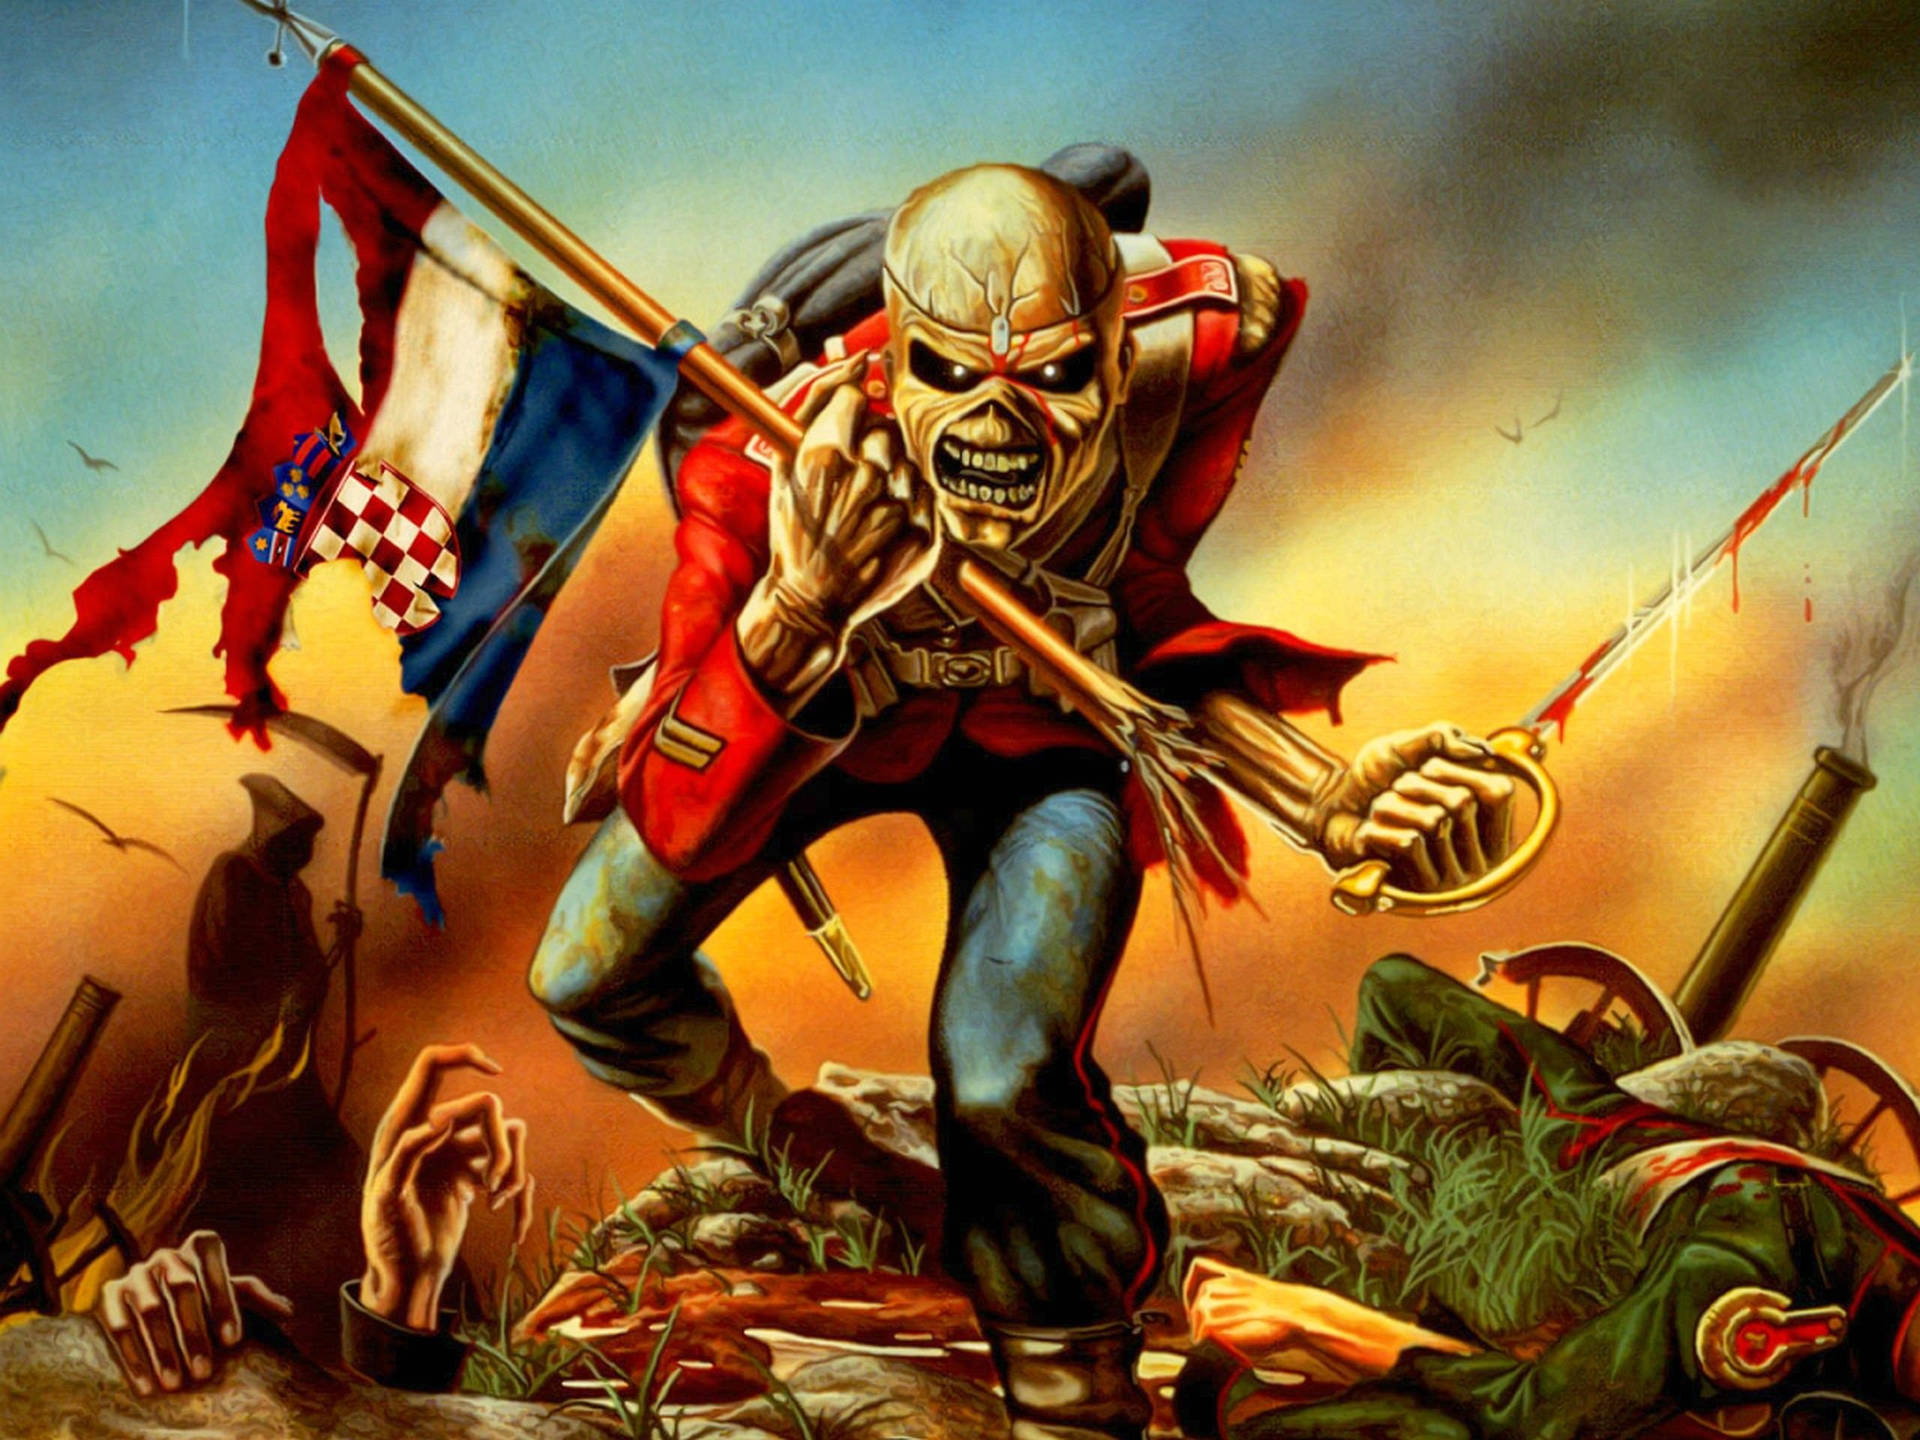 War is not a game for Iron Maiden's iconic mascot Eddie Wallpaper